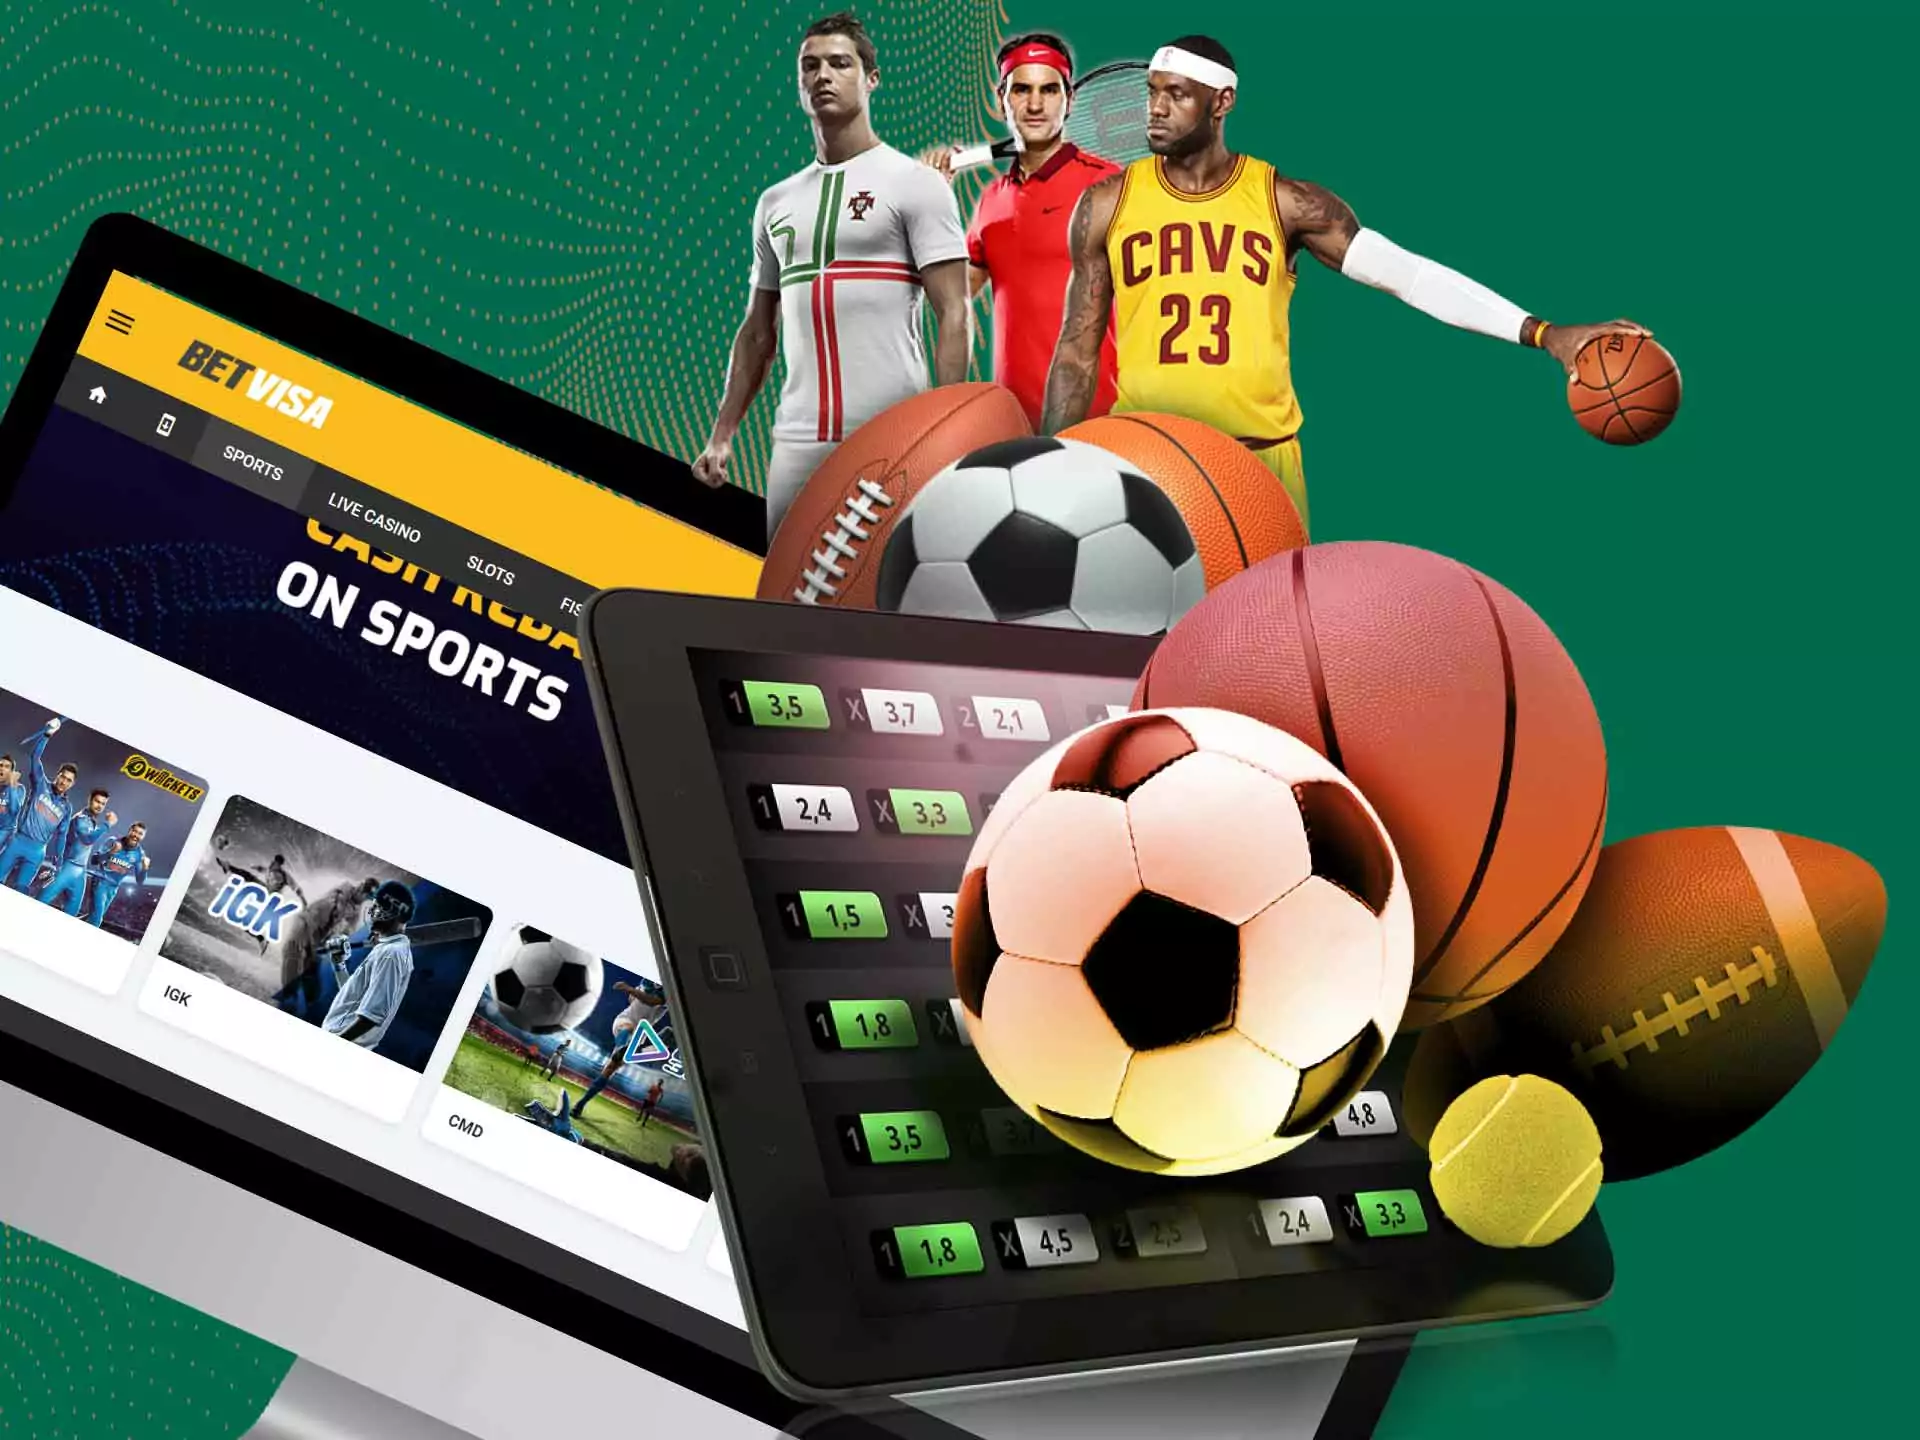 Place single bets at BetVisa if you are new to betting.